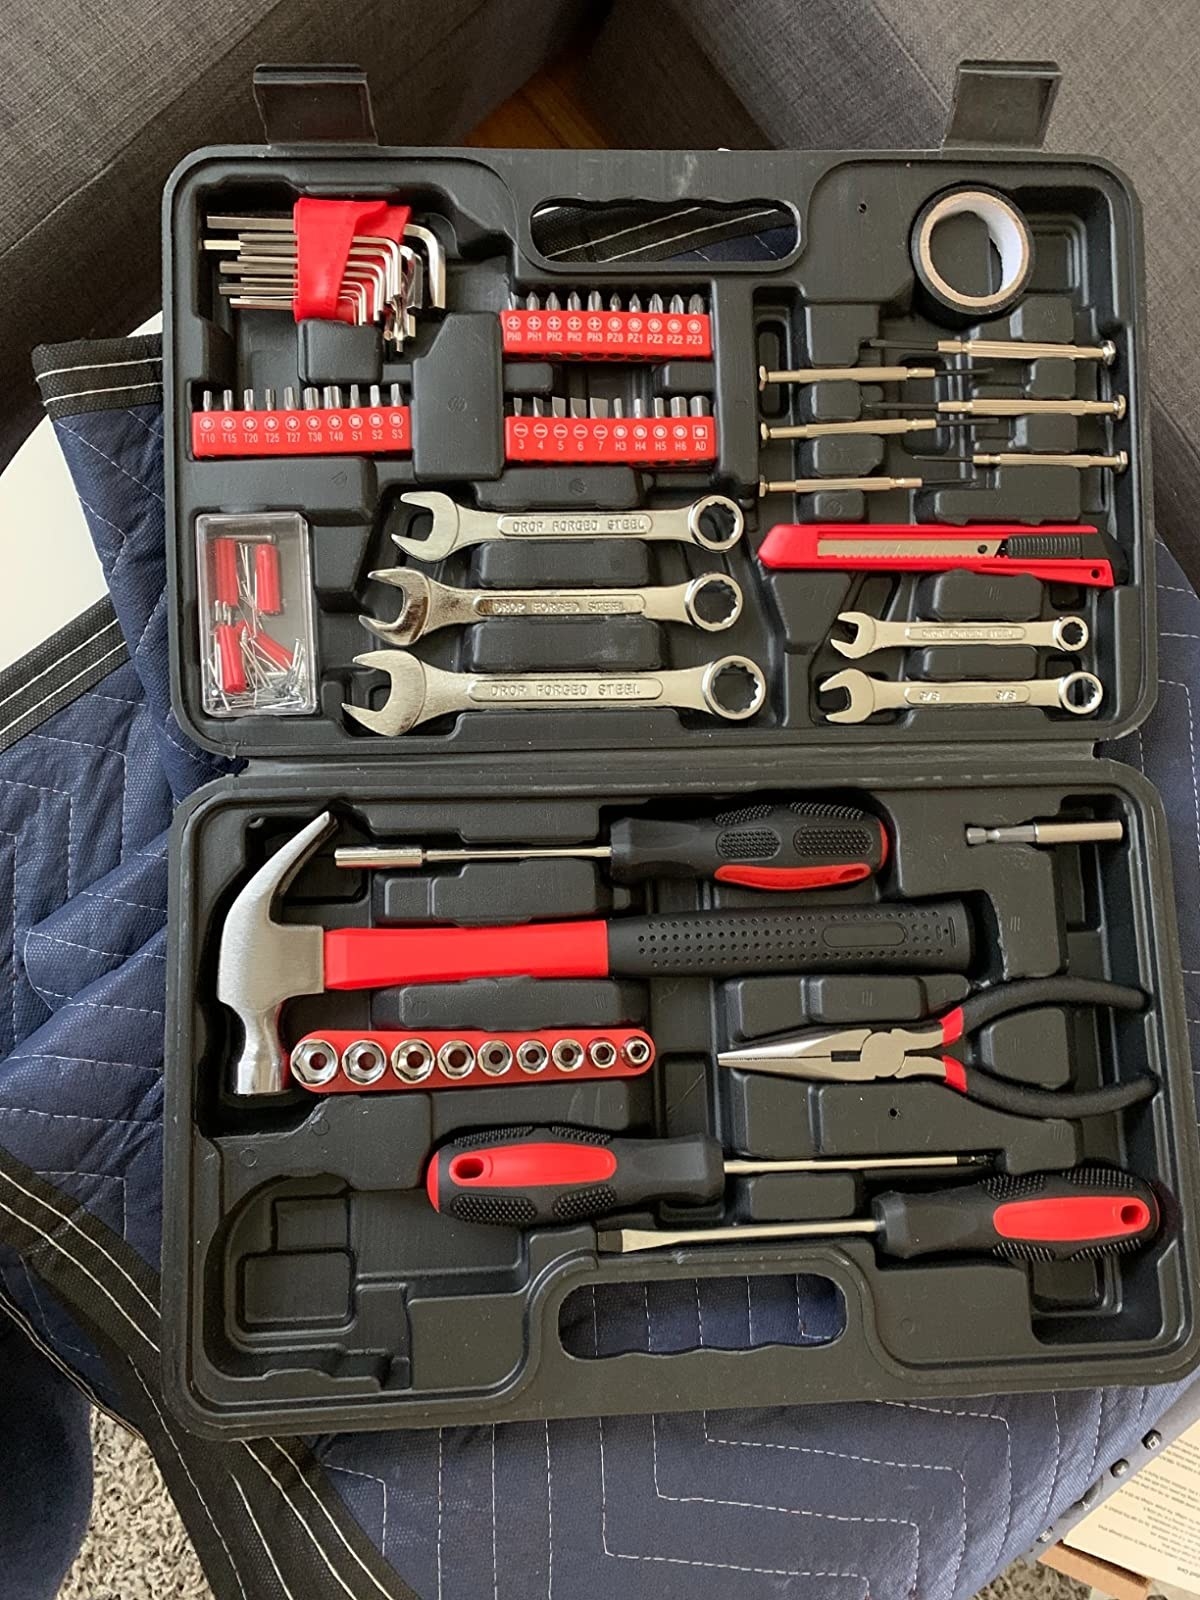 the full tool kit open with hammer, screwdrivers, wrenches, and bolt tighteners